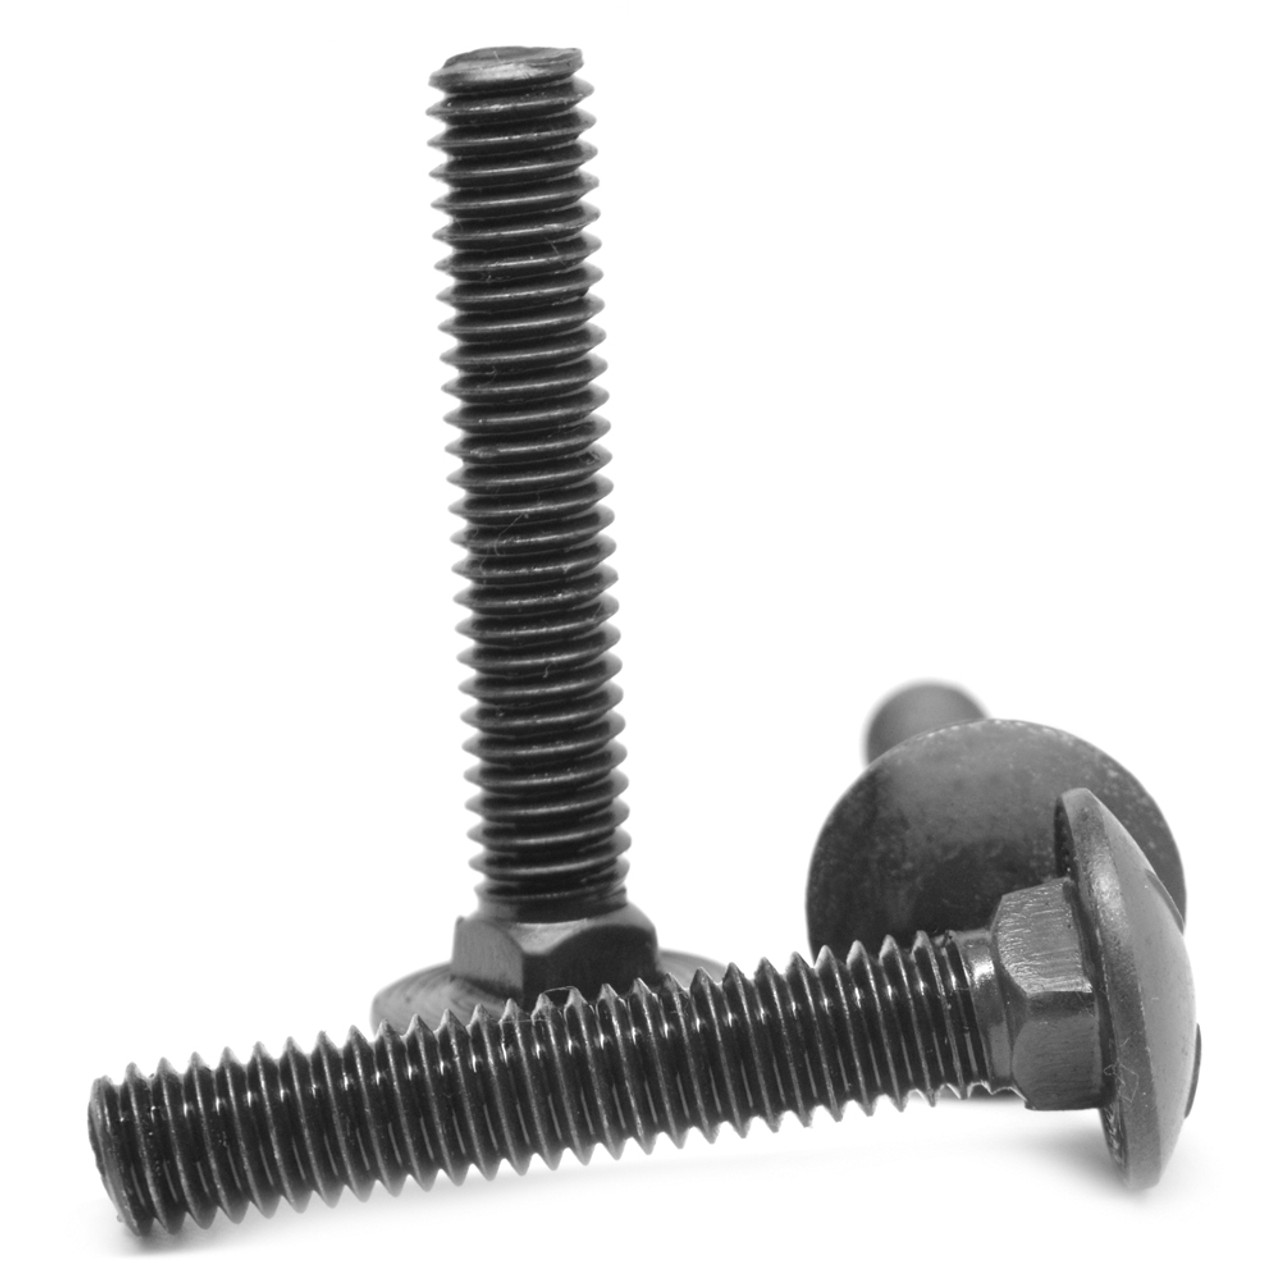 1/4-20 x 1 Coarse Thread Carriage Bolt Low Carbon Steel Black Oxide